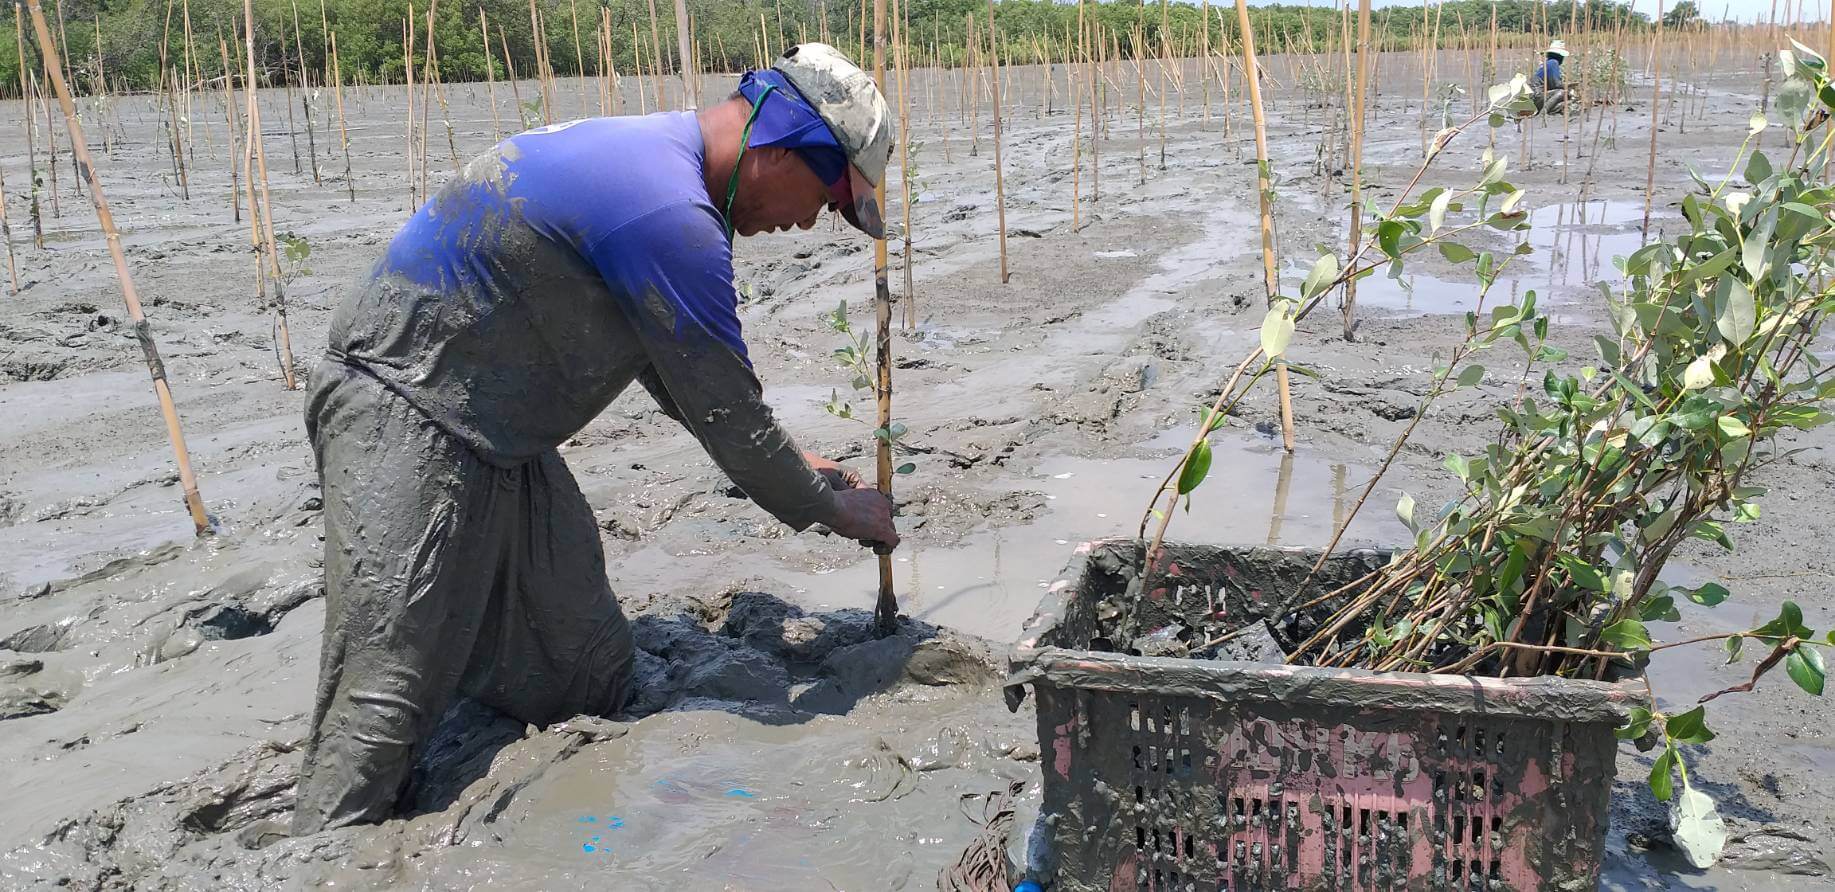 CPF continues to conserve and restore mangrove forests to build food security